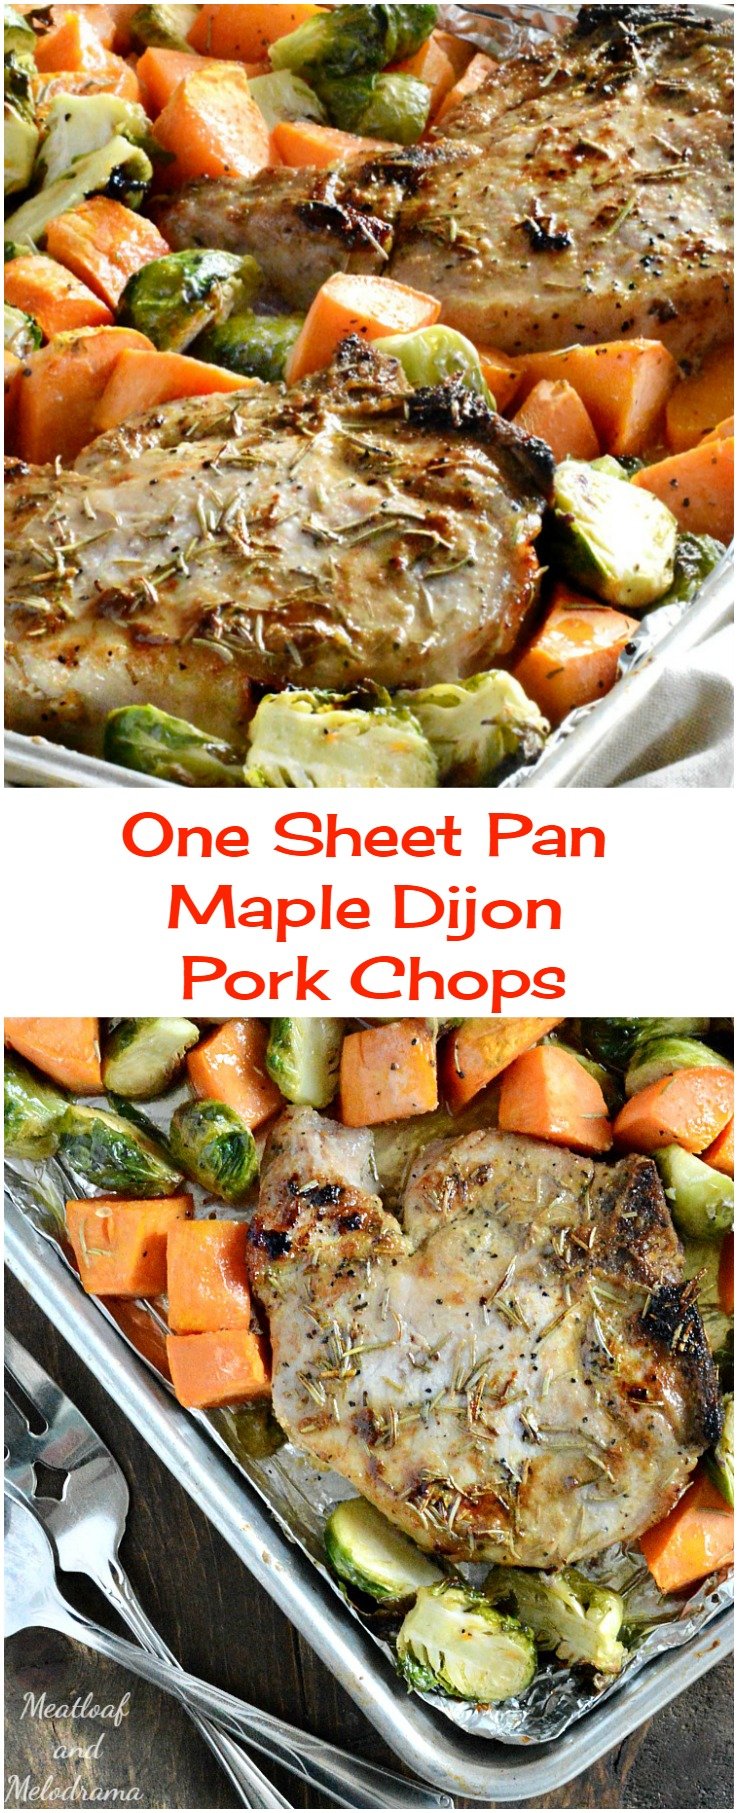 One Sheet Pan Maple Dijon Pork Chops with Brussels Sprouts and Sweet Potatoes